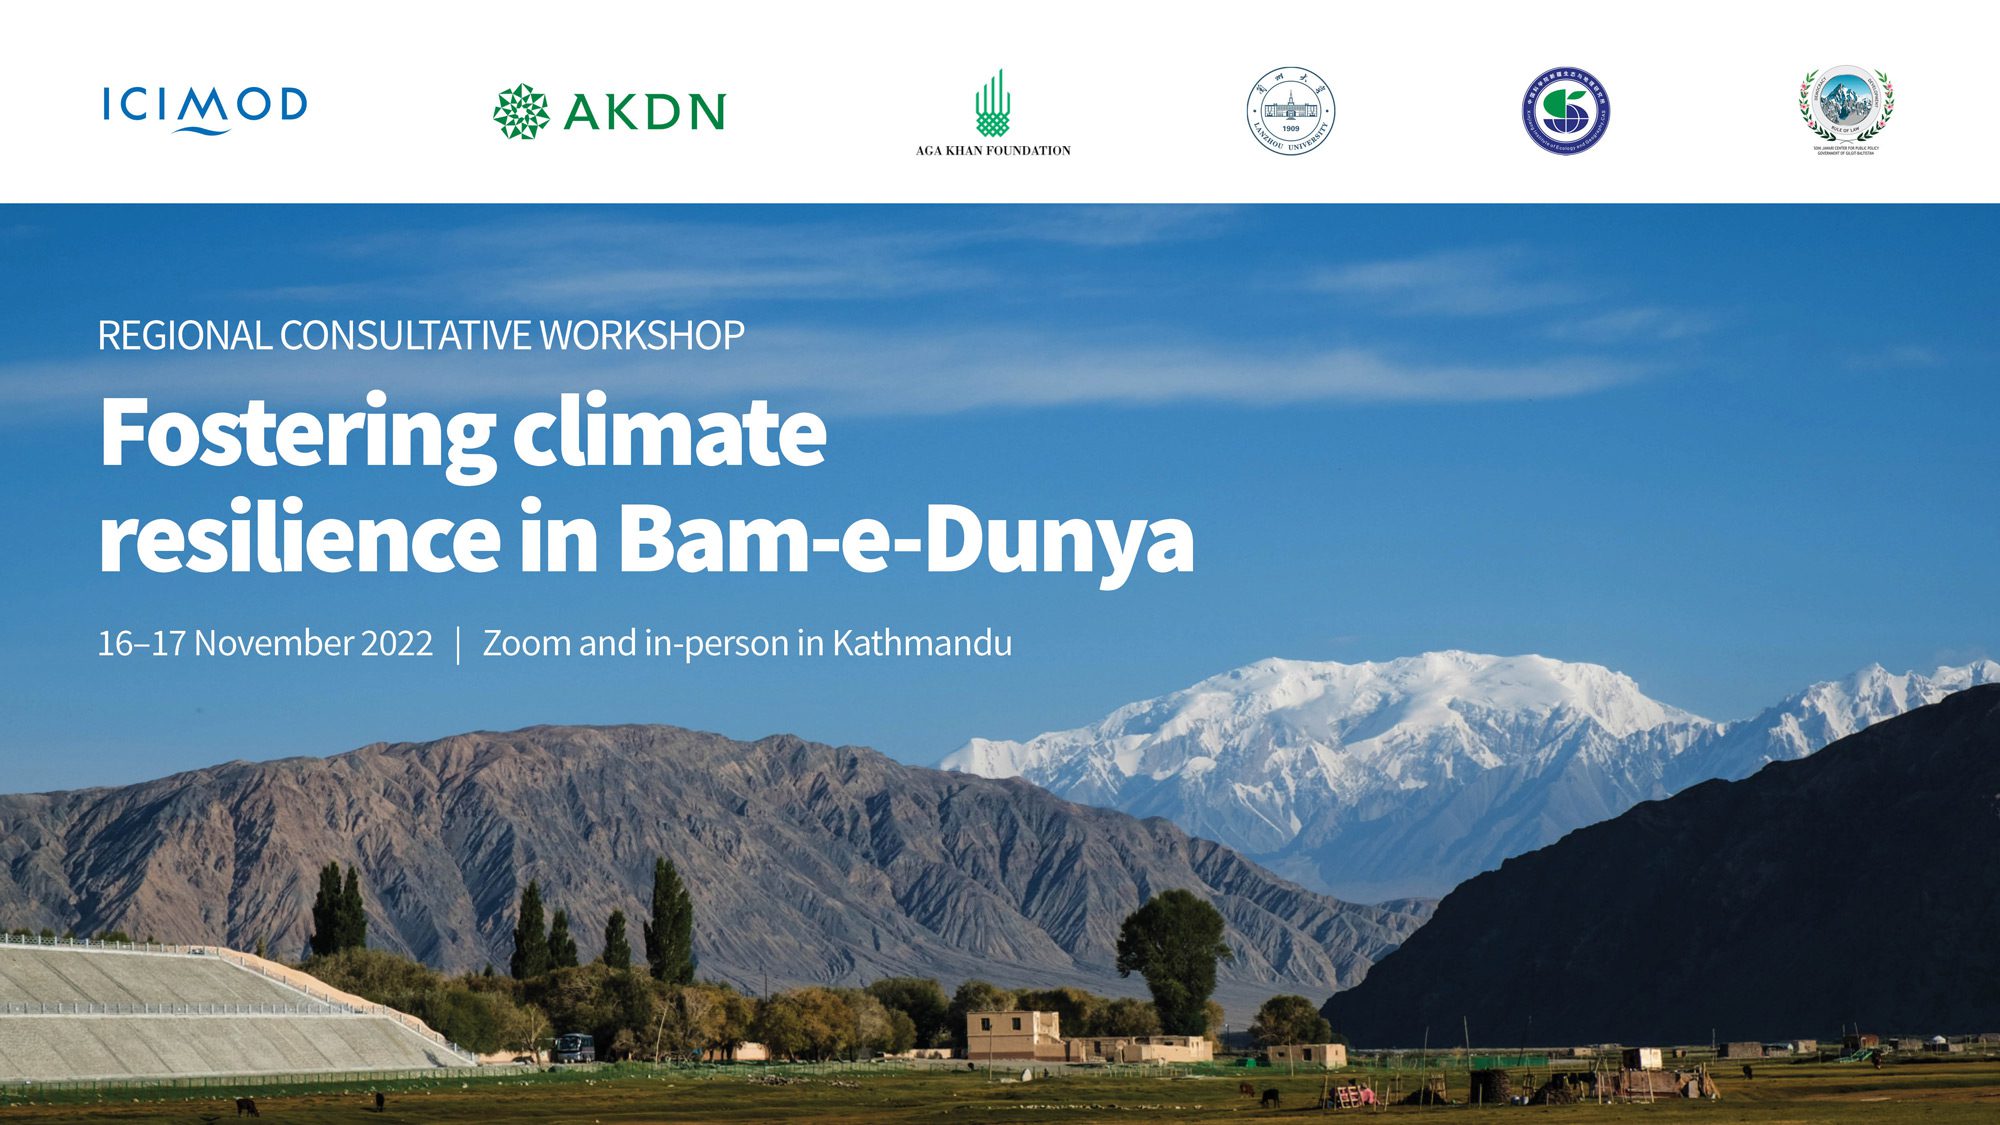 Fostering climate resilience in Bam-e-Dunya